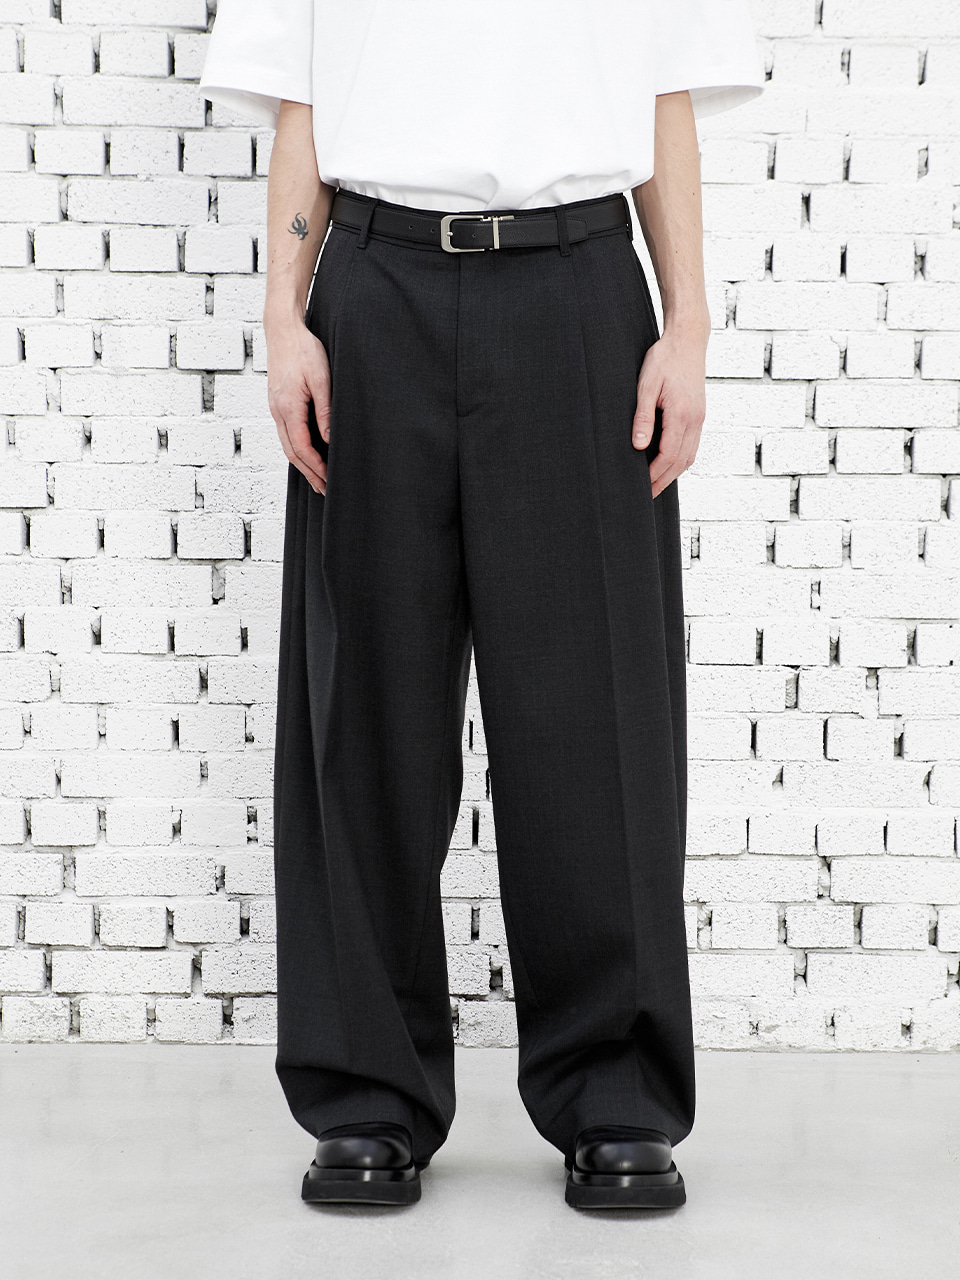 IEY - MAXI TAILORED PANTS Charcoal